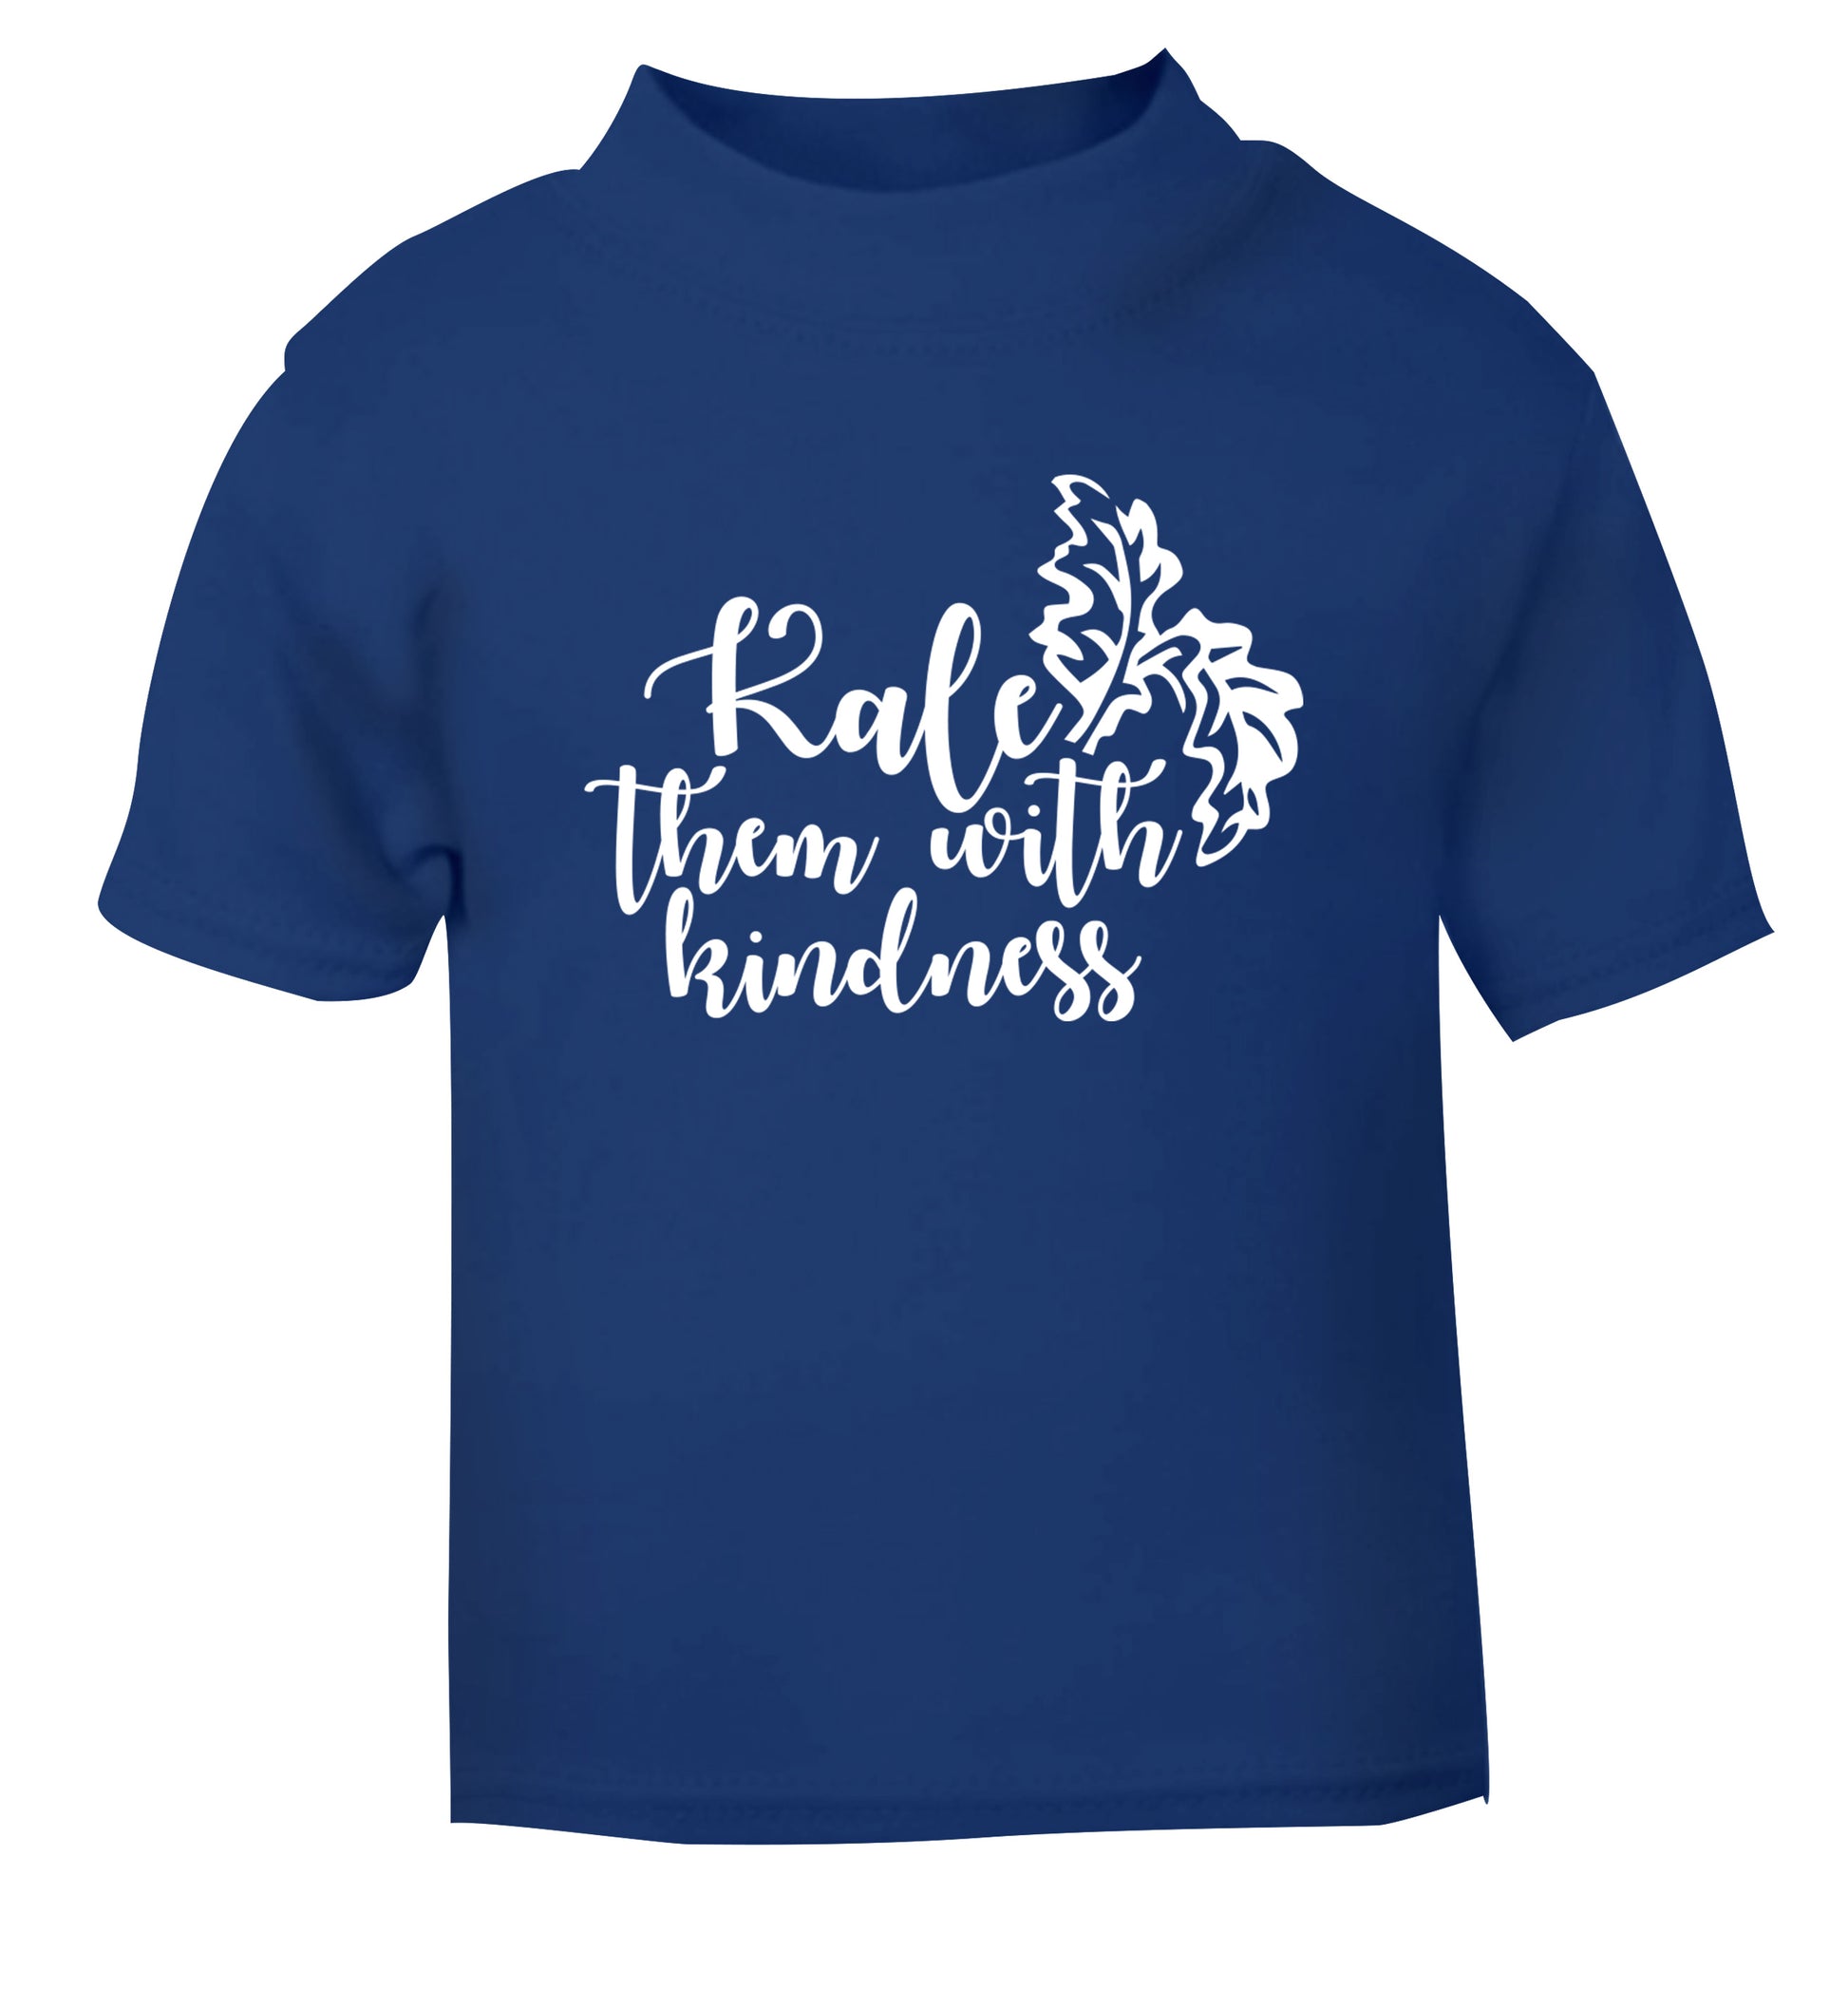 Kale them with kindness blue Baby Toddler Tshirt 2 Years